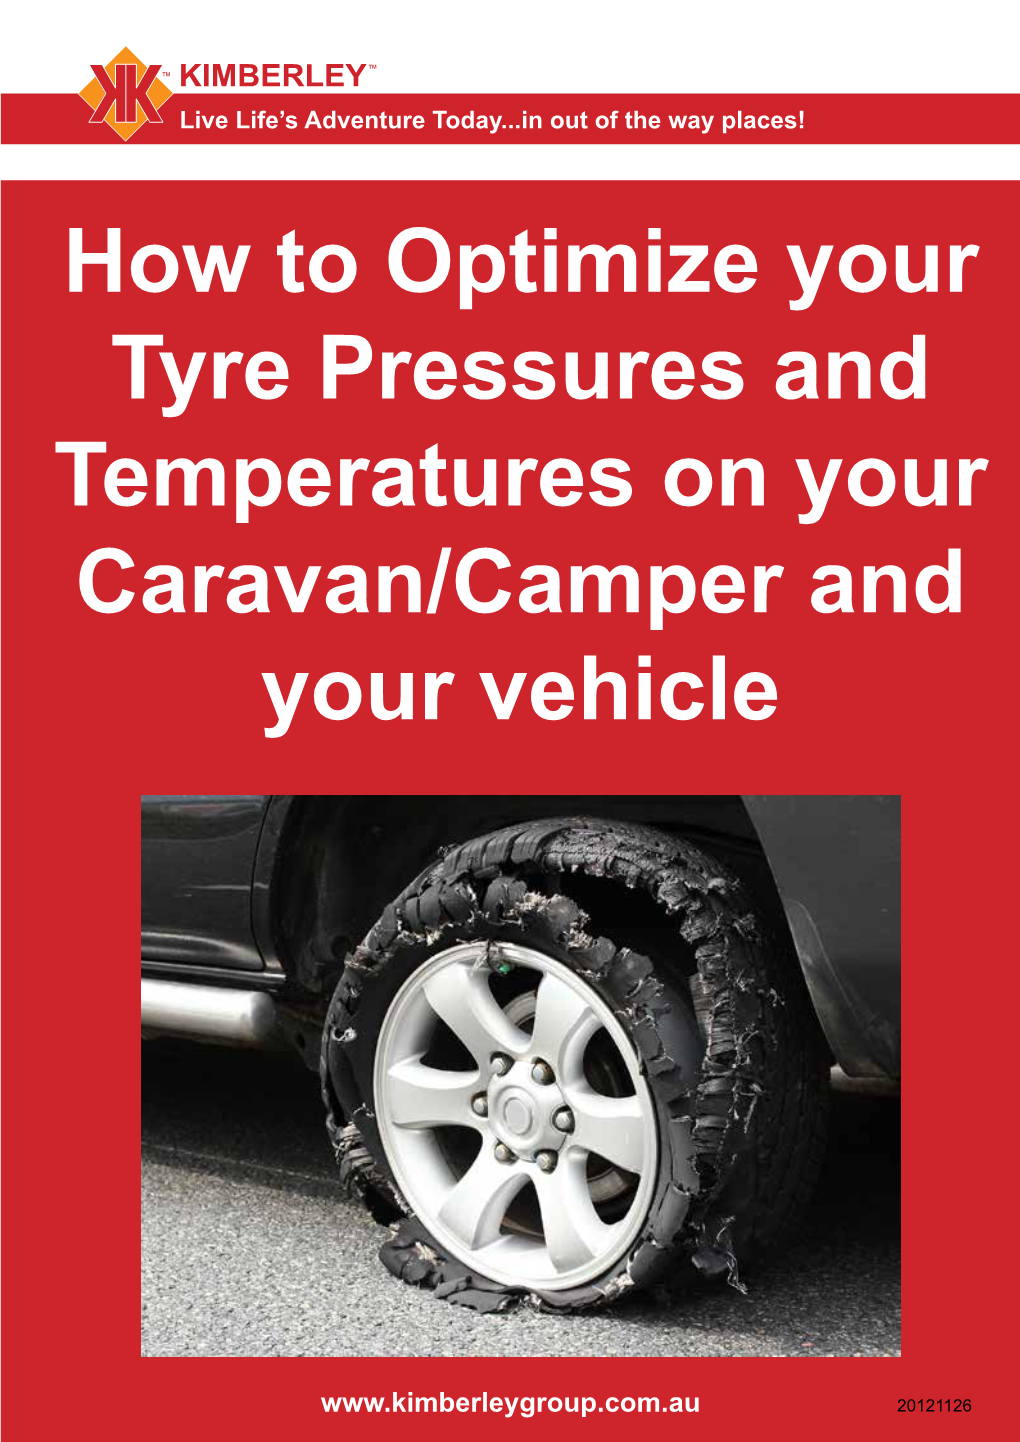 How to Optimize Your Tyre Pressures and Temperatures on Your Caravan